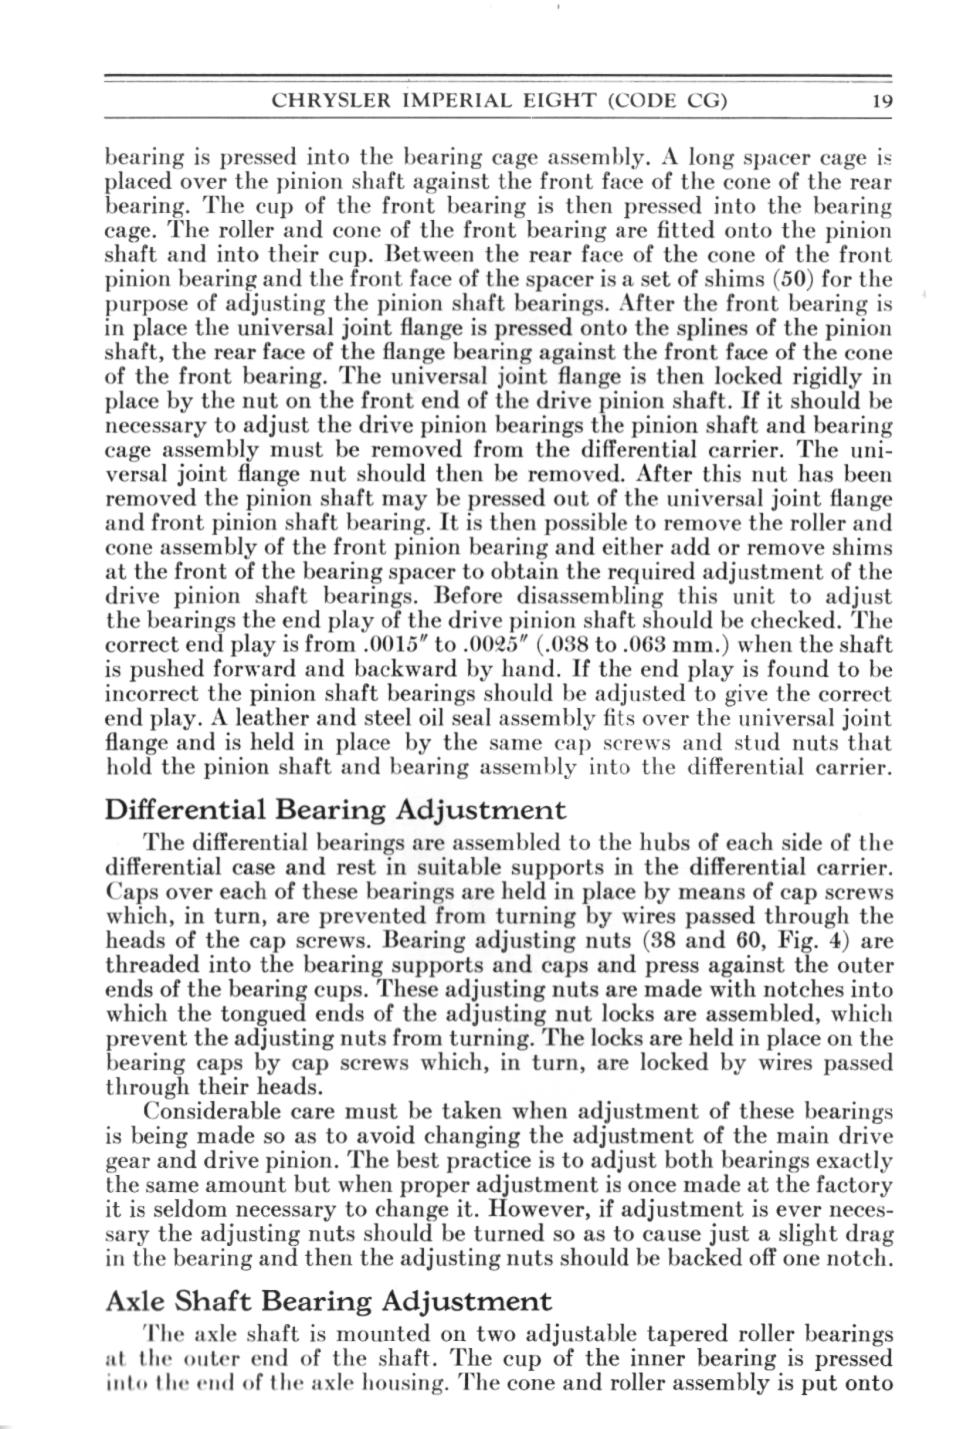 1931 Chrysler Imperial Owners Manual Page 76